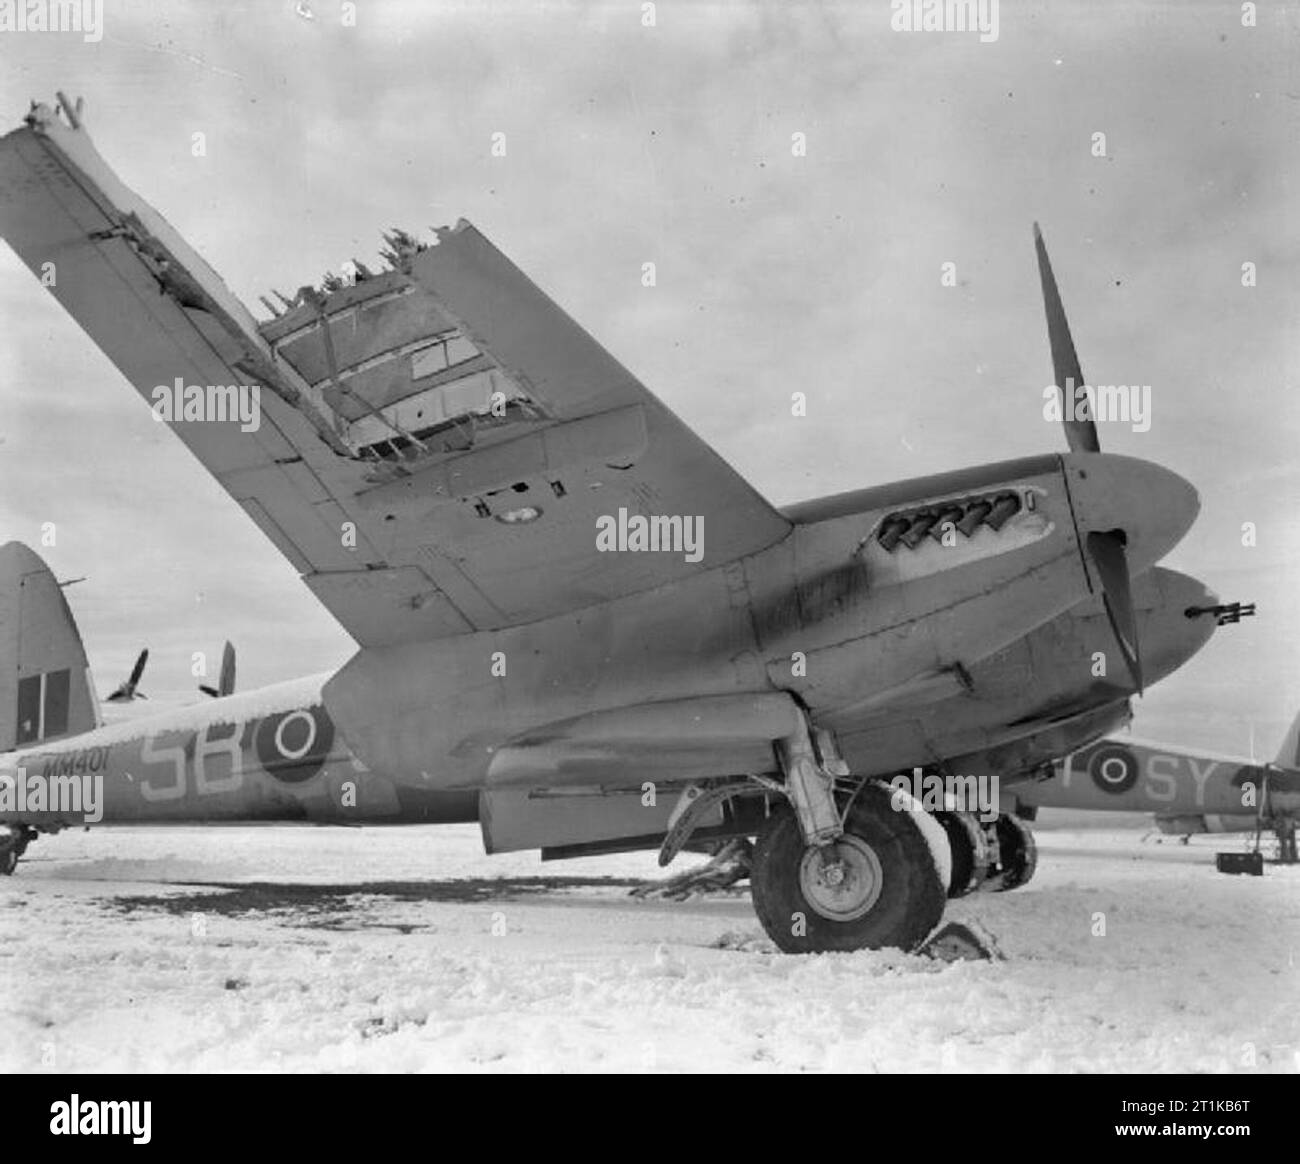 Royal Air Force- 2nd Tactical Air Force, 1943-1945. Severely damaged De Havilland Mosquito FB Mark VI, MM401 'SB-J', of No. 464 Squadron RAAF based at Hunsdon, Hertfordshire, parked at Friston Emergency Landing Ground, Sussex. The aircraft, flown by Squadron Leader A G Oxlade (pilot) and Flight Lieutenant D M Shanks (navigator), was hit by anti-aircraft fire while attacking a flying-bomb site in the Pas de Calais on 21 February 1944. The port engine was shattered, and the port undercarriage and most of the outer starboard wing was blown off. Despite the damage, the crew flew MM401 back and cra Stock Photo